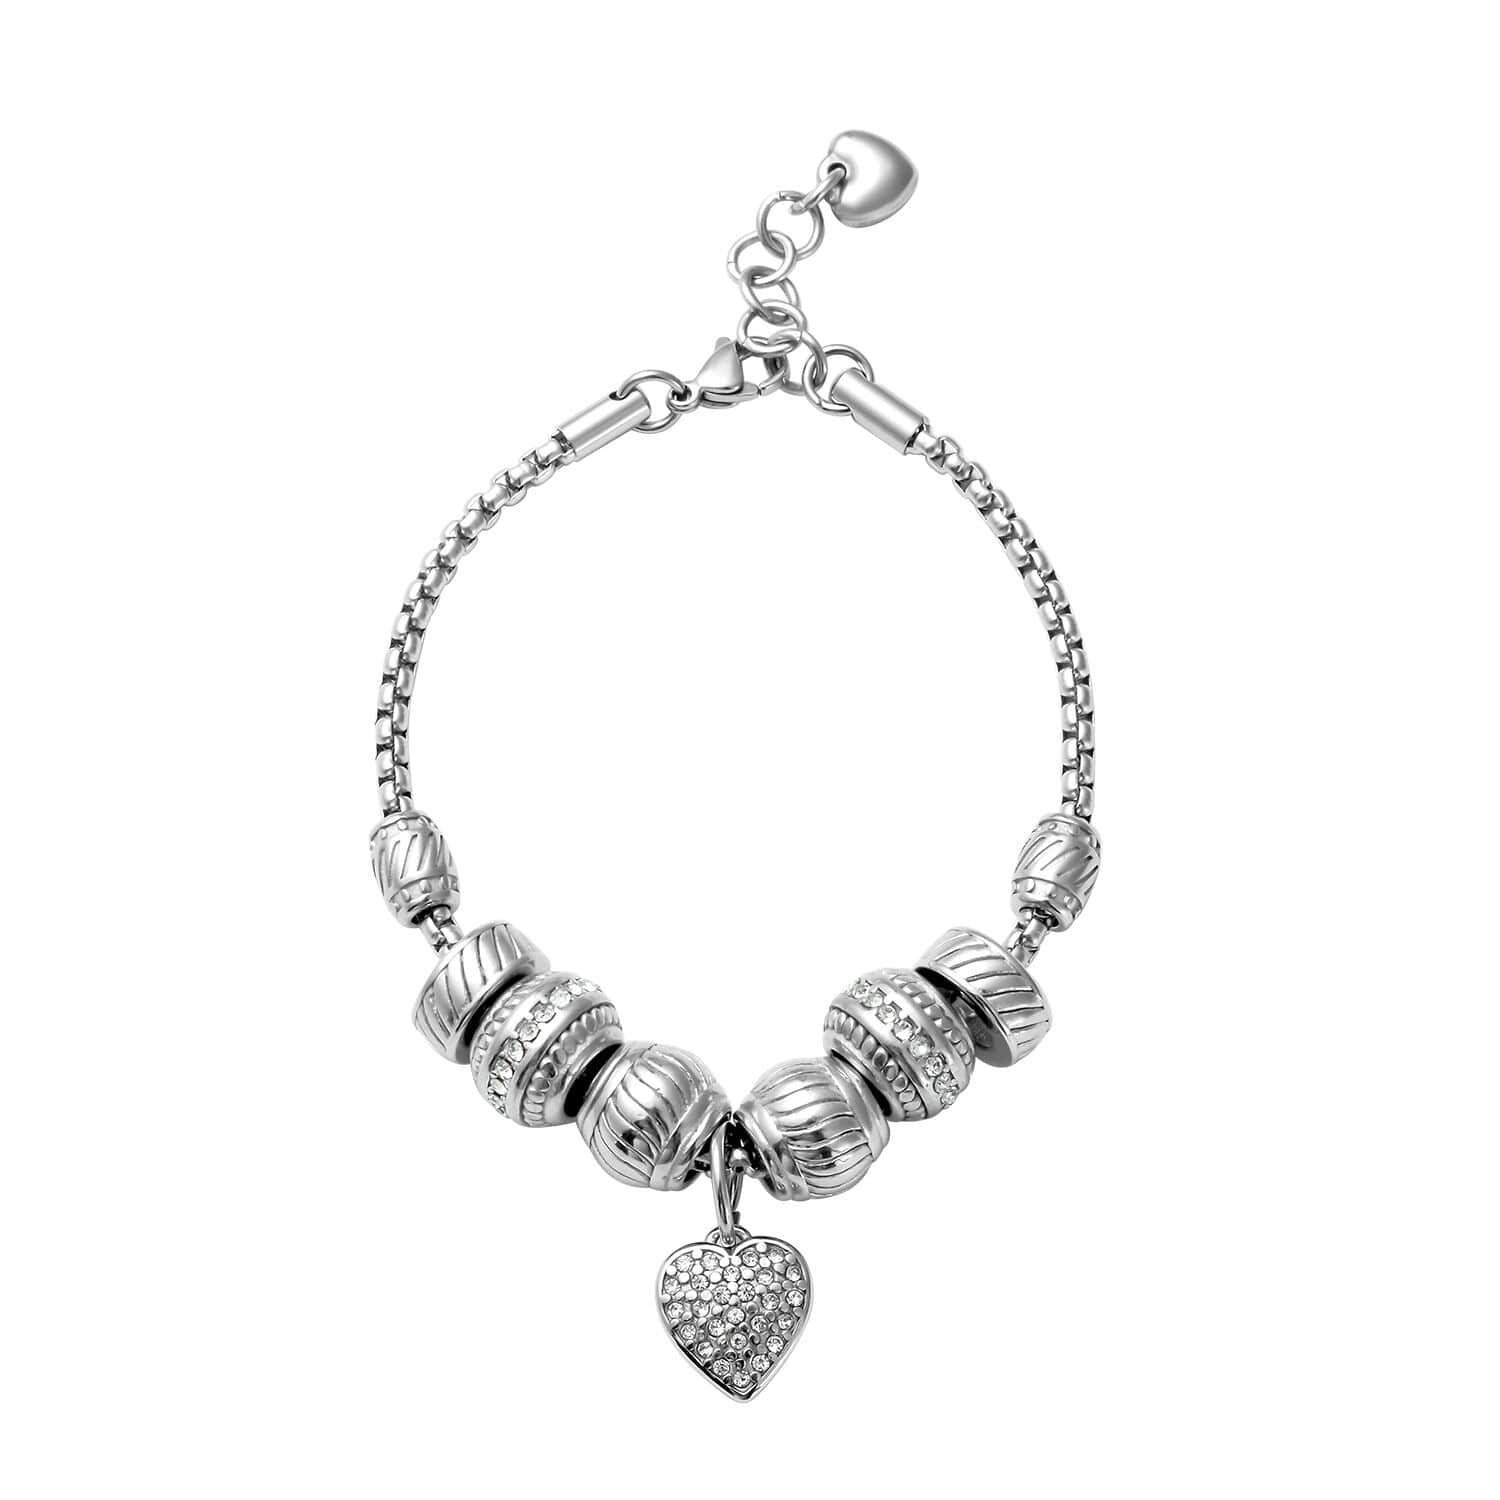 Shop LC Love Heart White Crystal Charm Bracelet for Women Jewelry Stainless Steel Size 7-8" Birthday Mothers Day Gifts for Mom - image 1 of 12